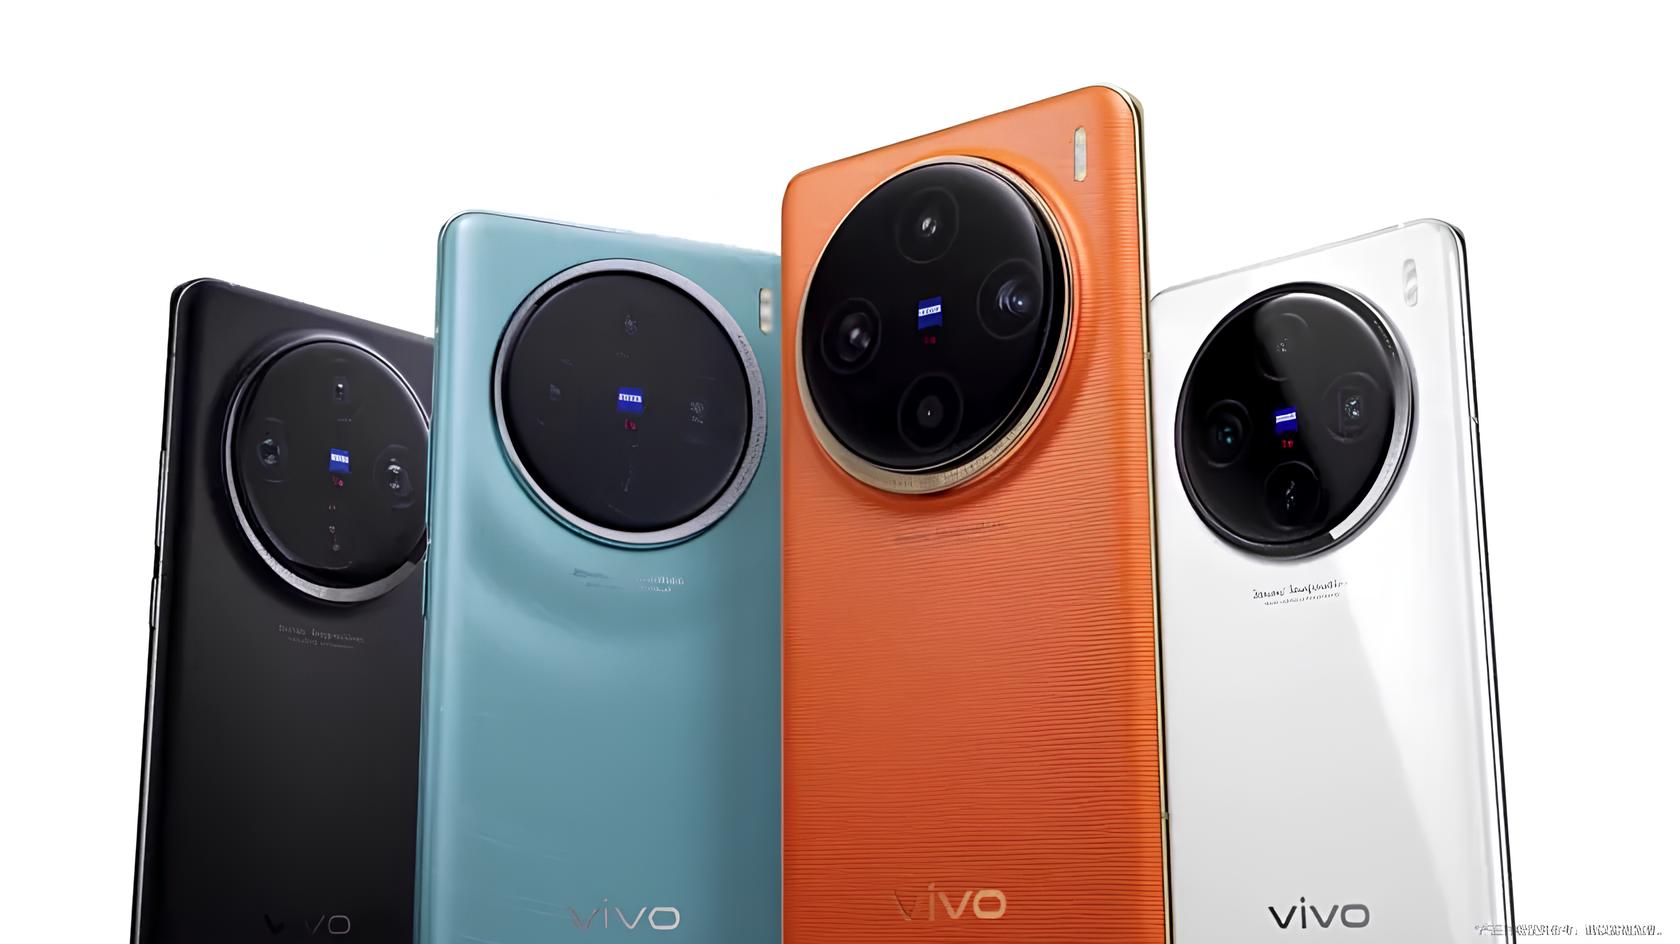 Vivo X 100 Series : Newly released Vivo X100 and Vivo X100 Pro with great features.. Zeiss brand triple camera, New Dimension 9300 chip set and many more..